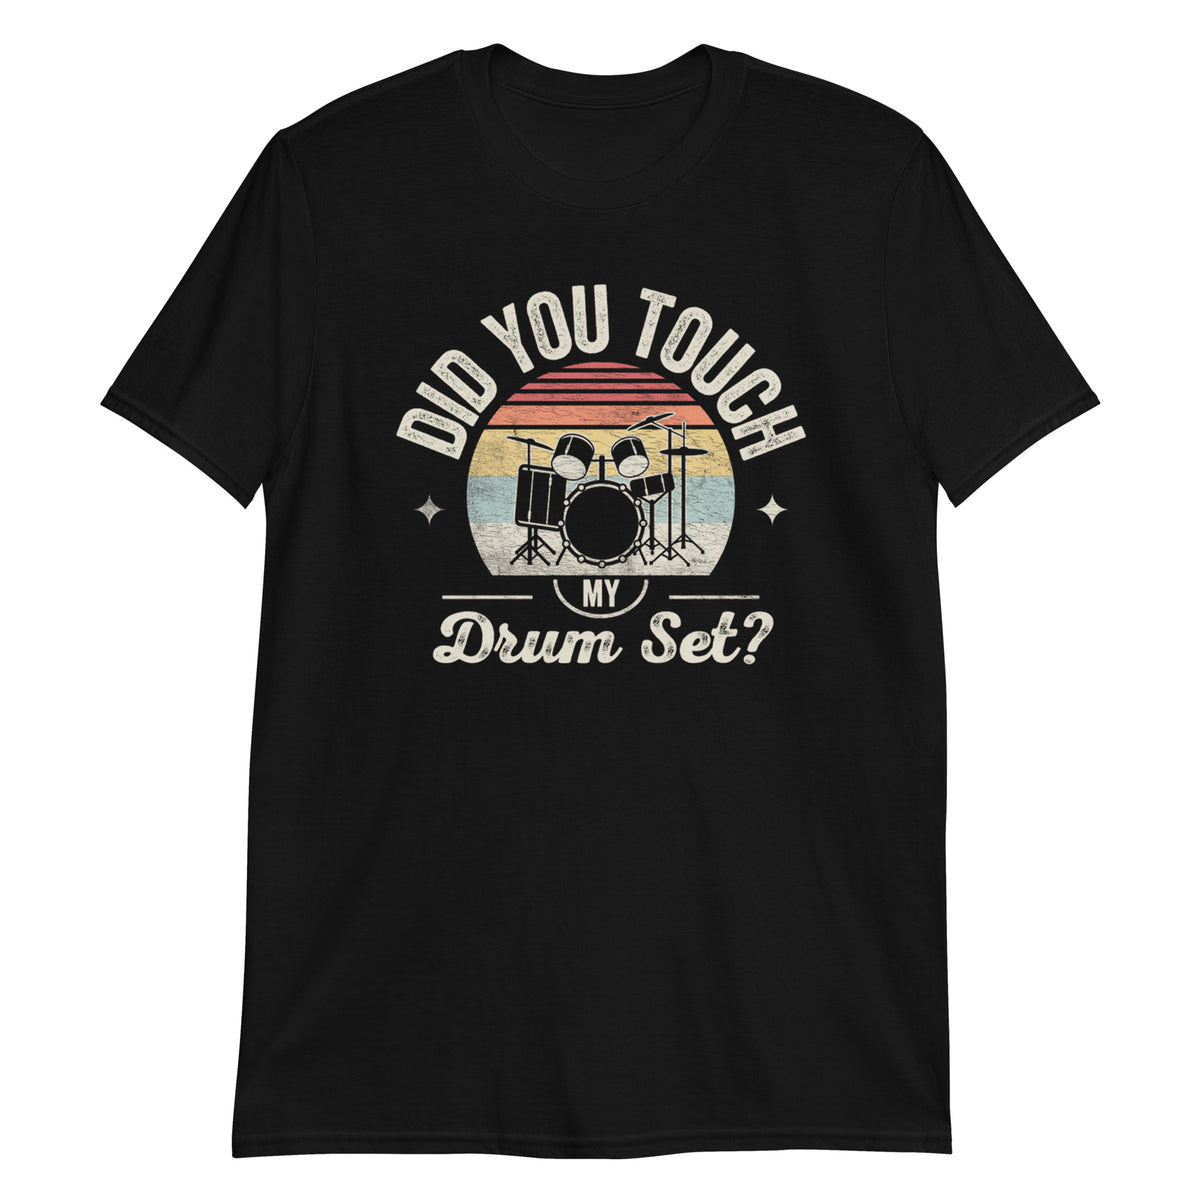 Did You Touch Drum Set T-Shirt